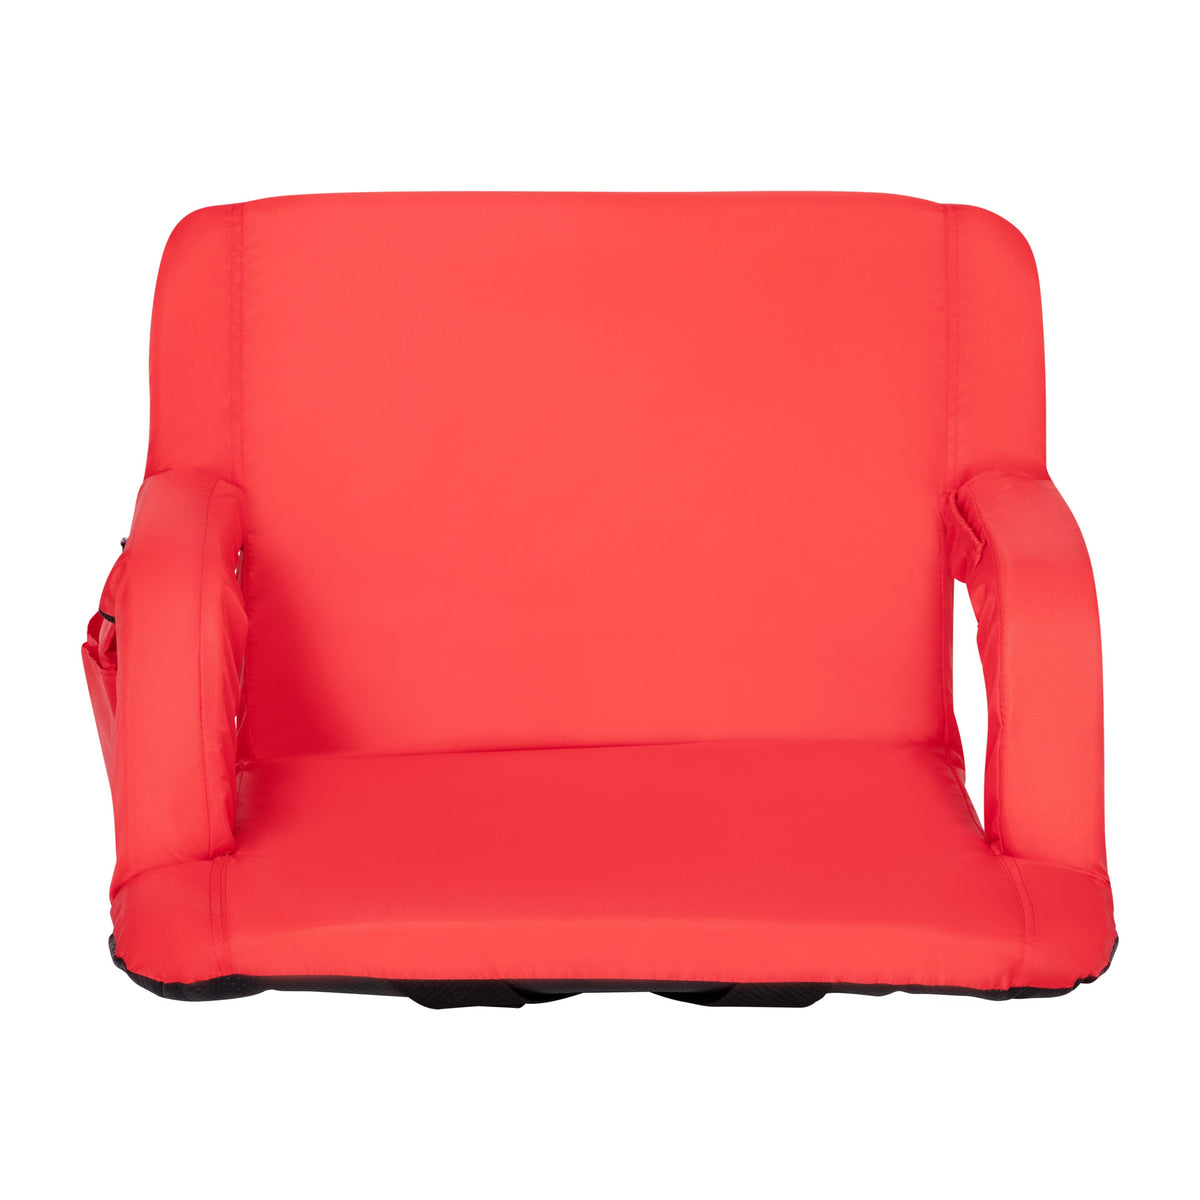 Red |#| Extra Wide Red Reclining Backpack Stadium Chair with Armrests & Storge Pockets